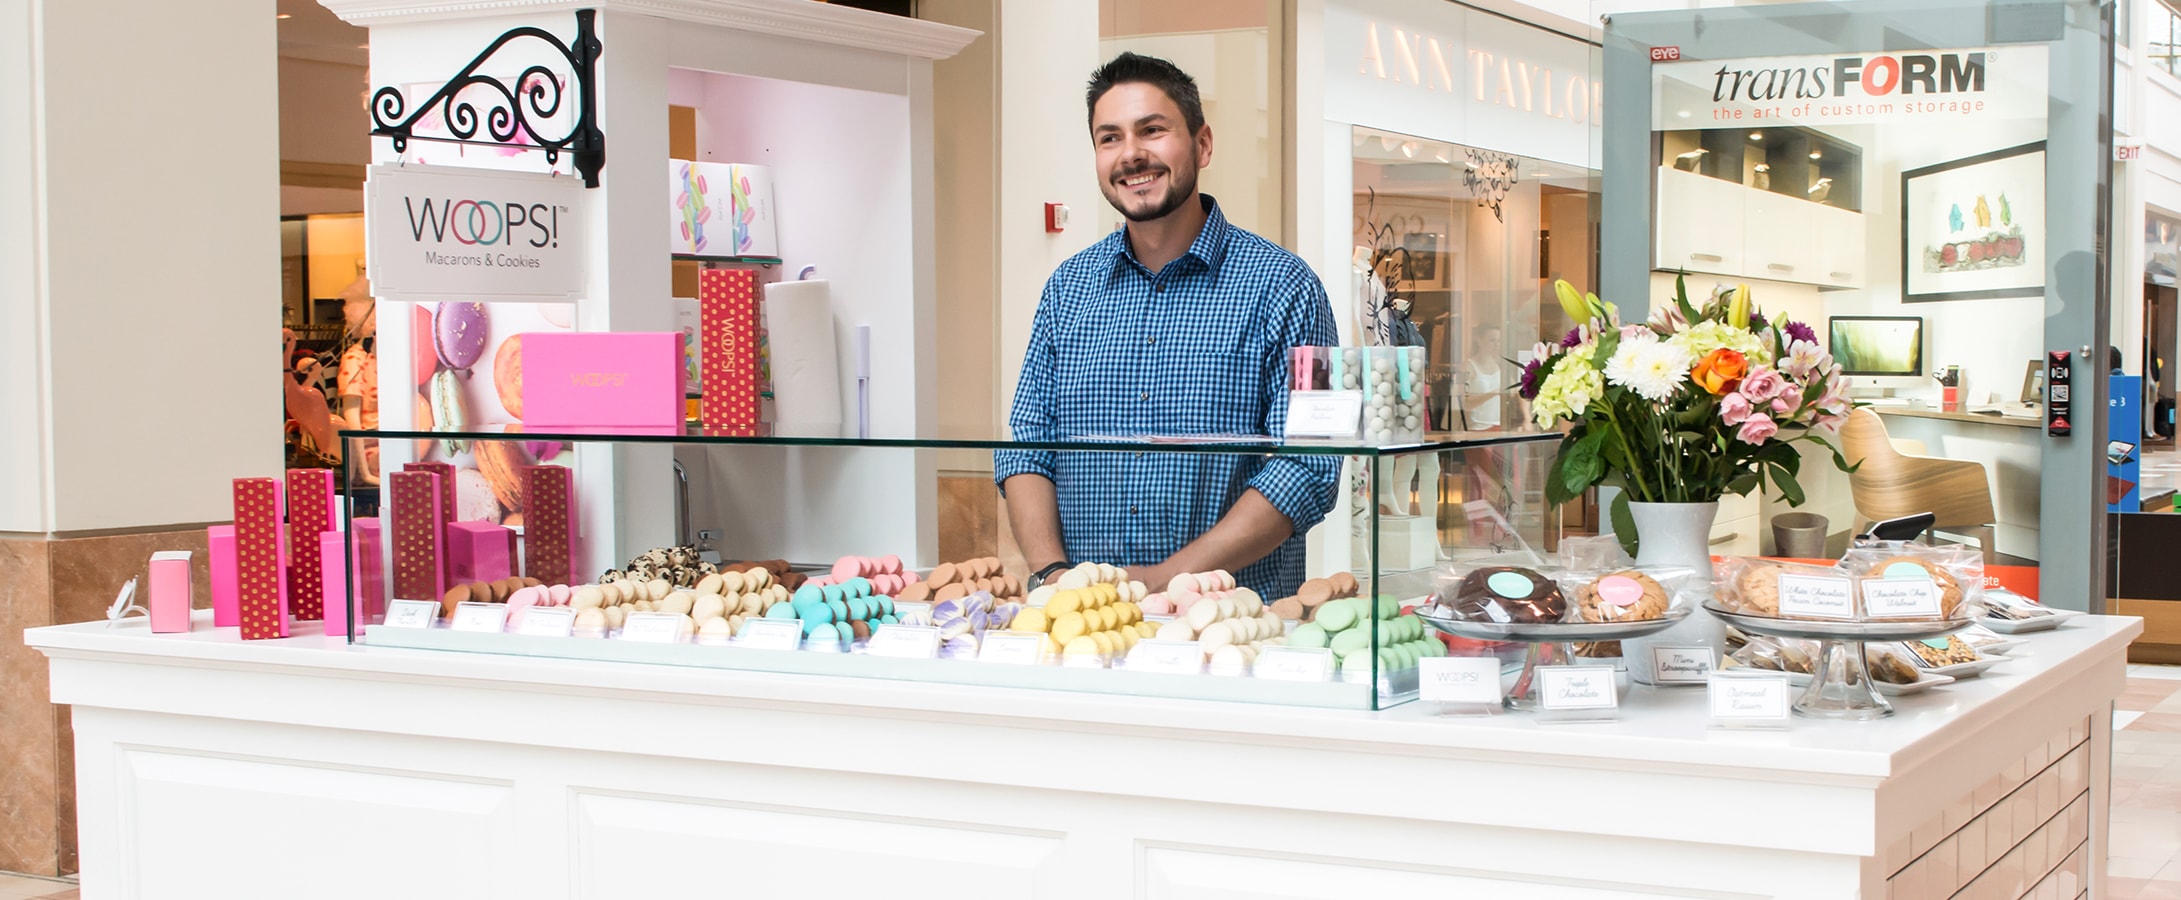 A smiling man is standing behind the counter of a Woops! Macarons & Gifts white kiosk. The kiosk is full of French macaron, macaron boxes, and flowers.